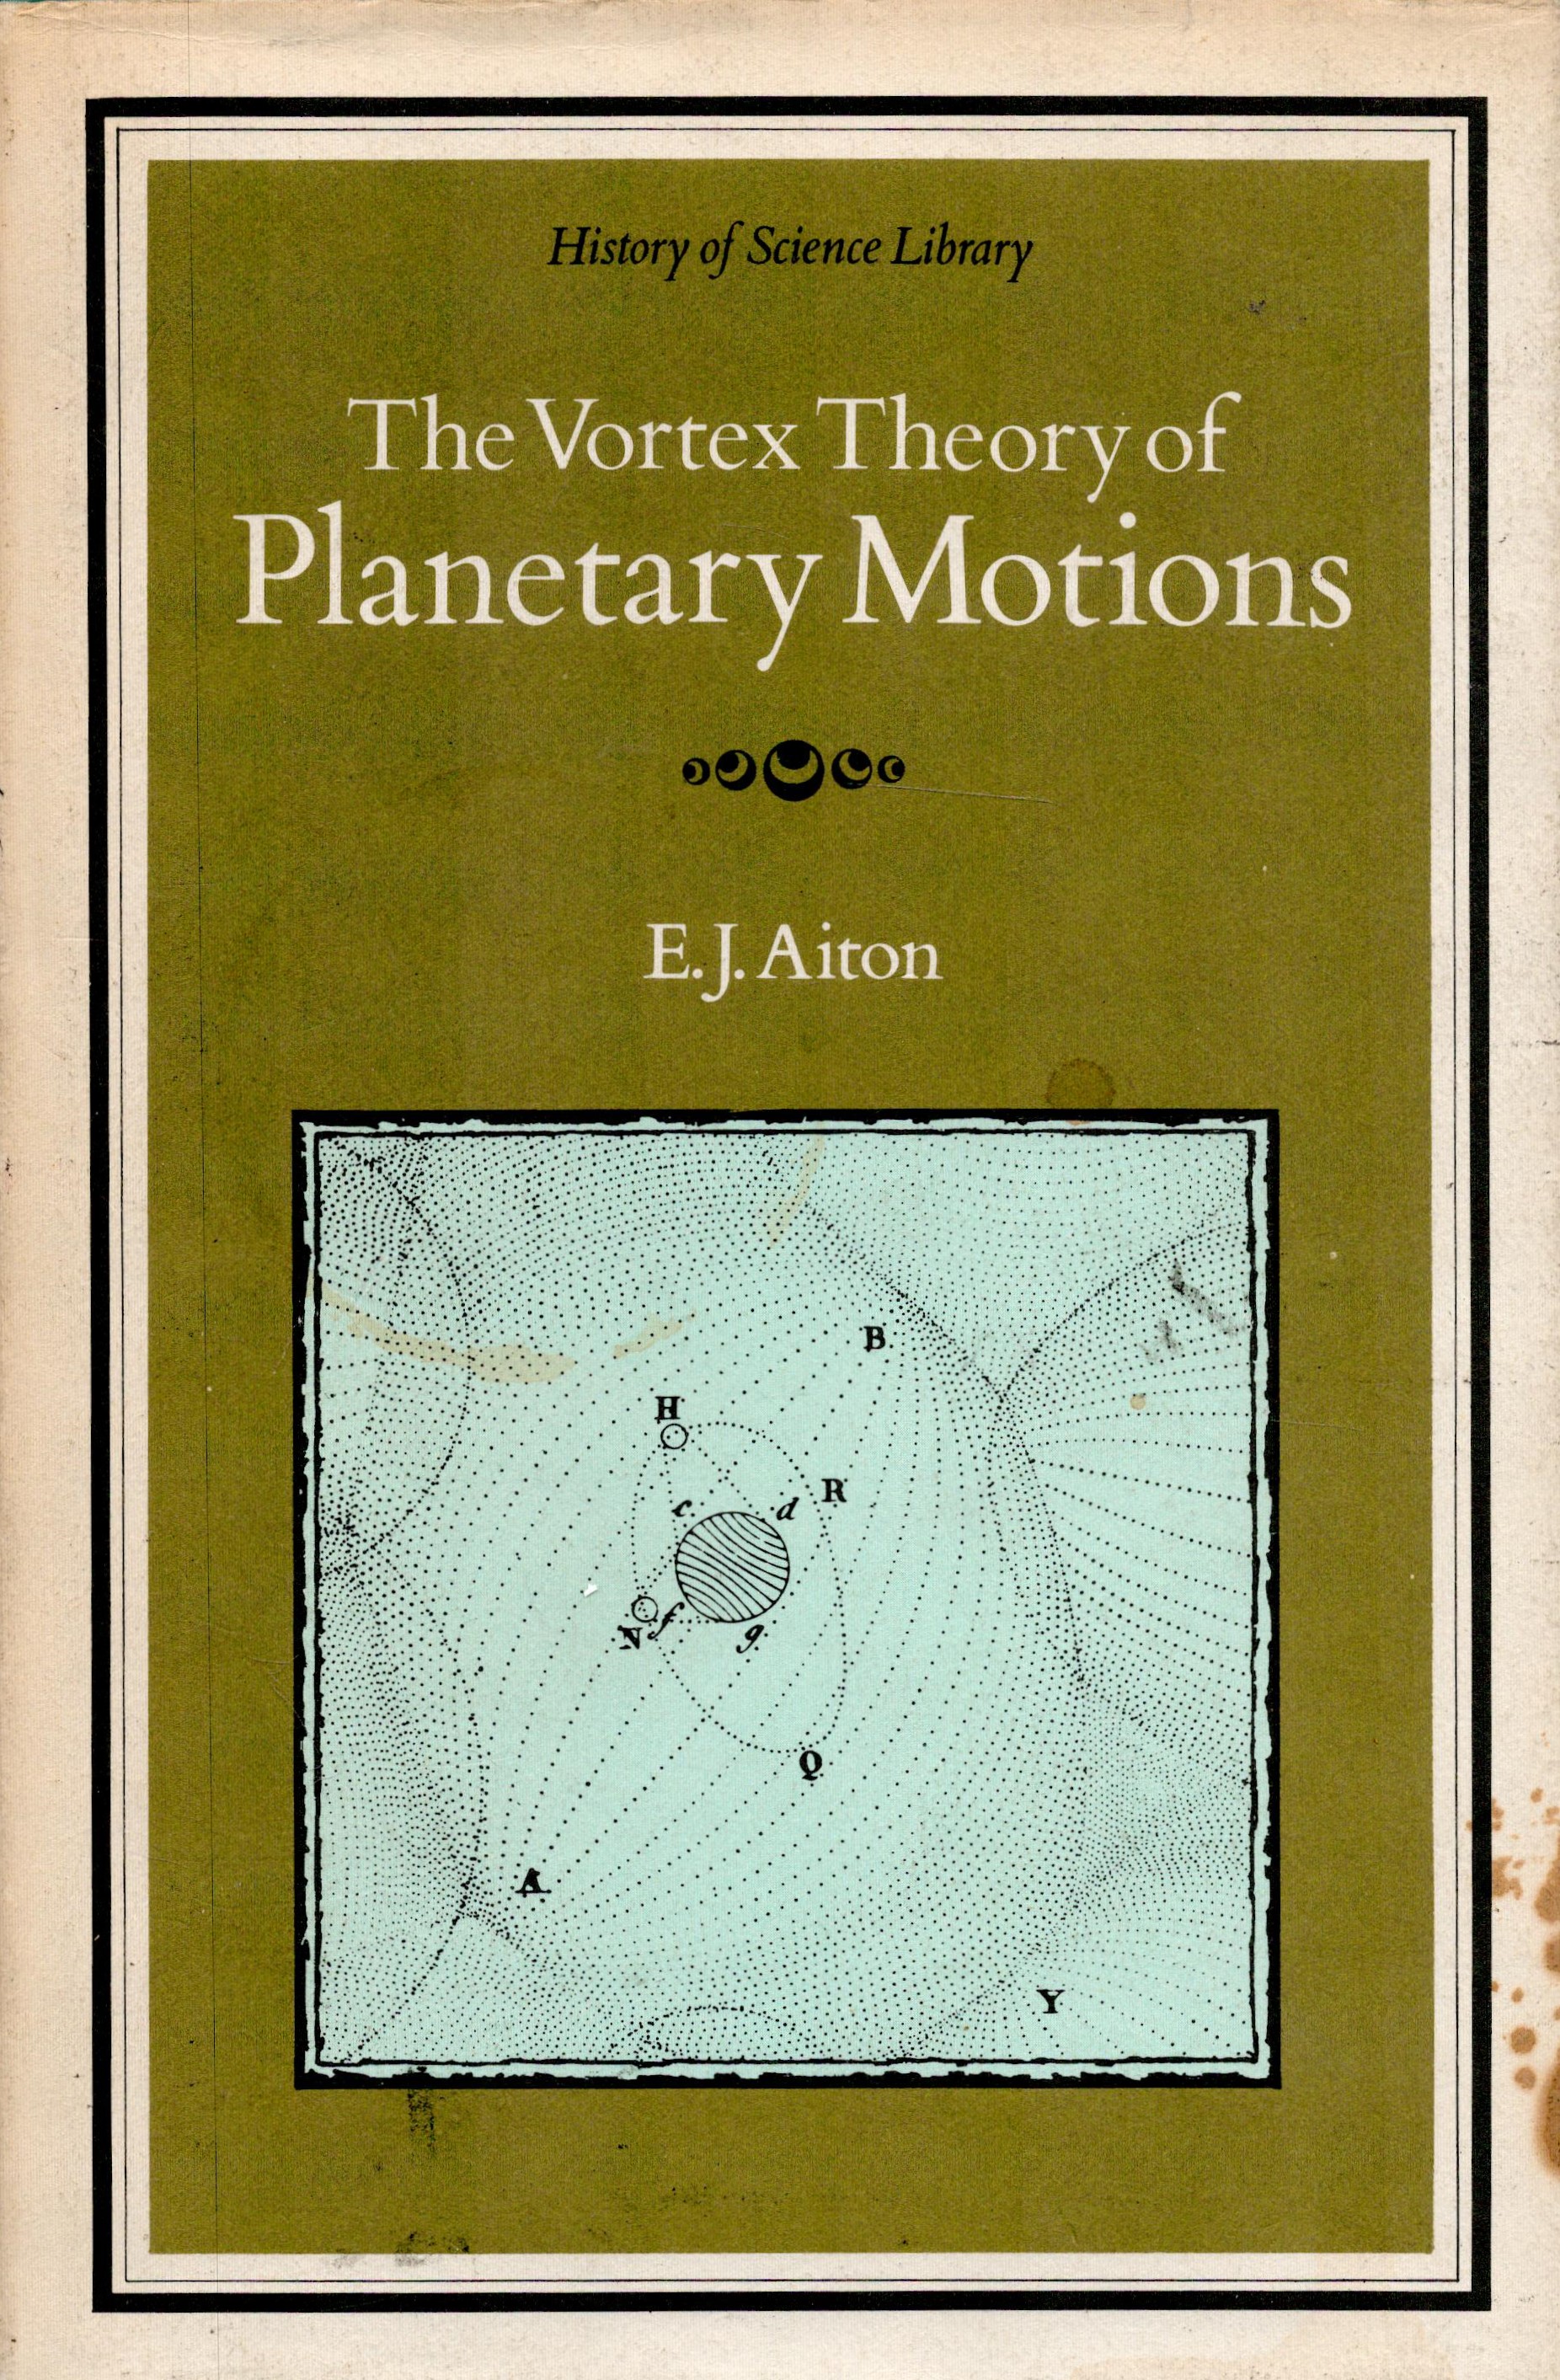 The Vortex Theory of Planetary Motions by E J Aiton Hardback Book 1972 First Edition published by